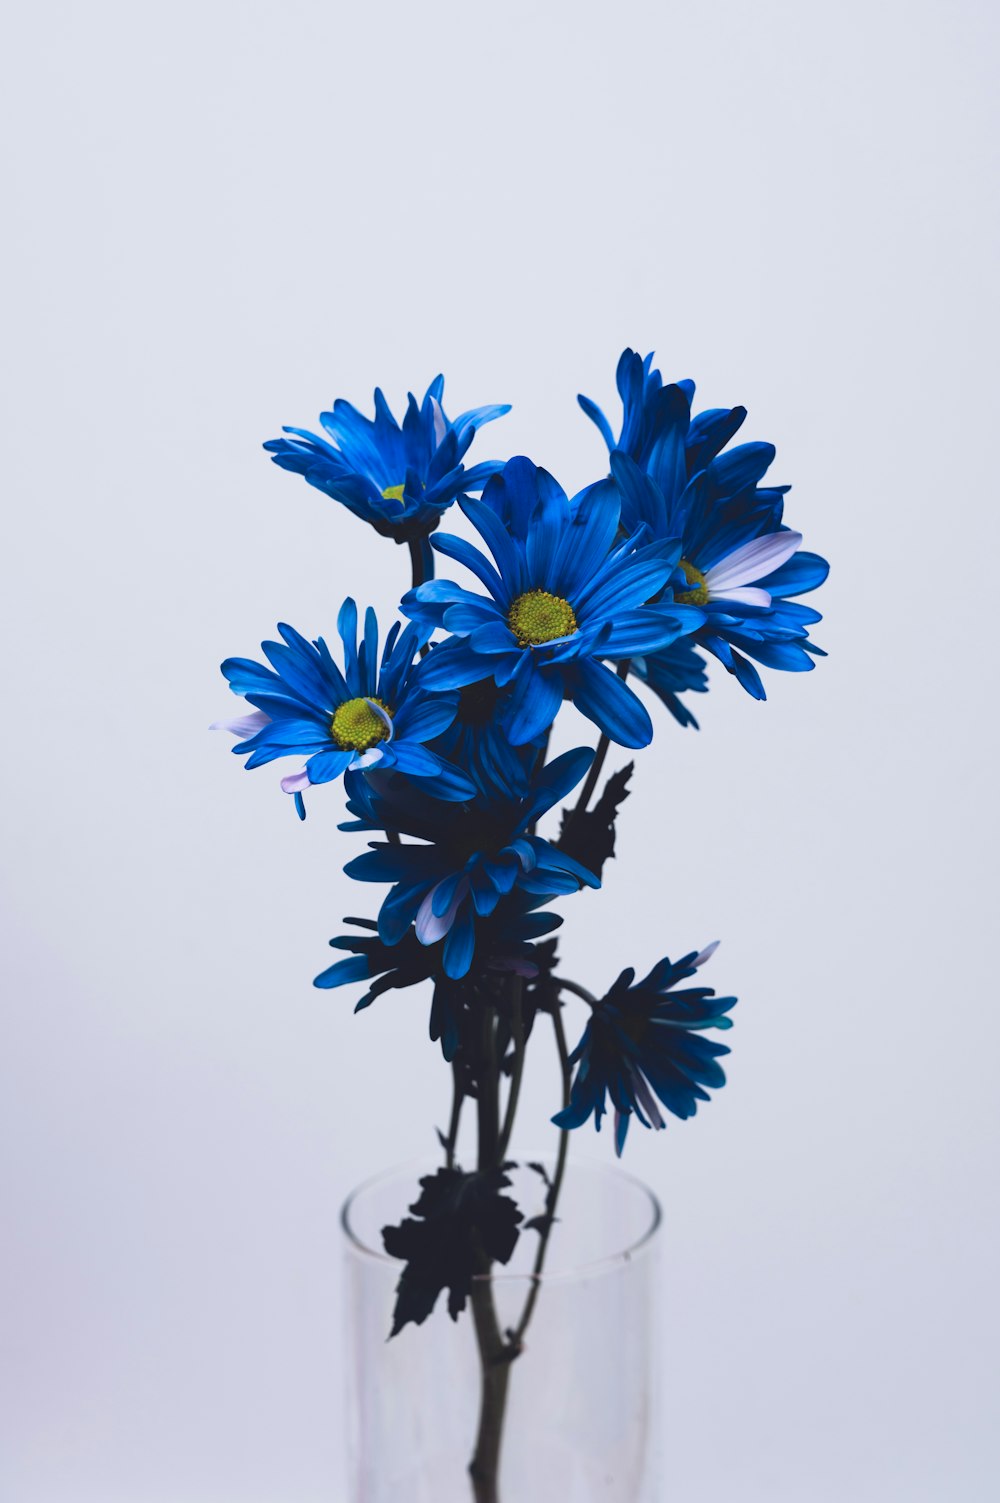 blue and white flowers on white background